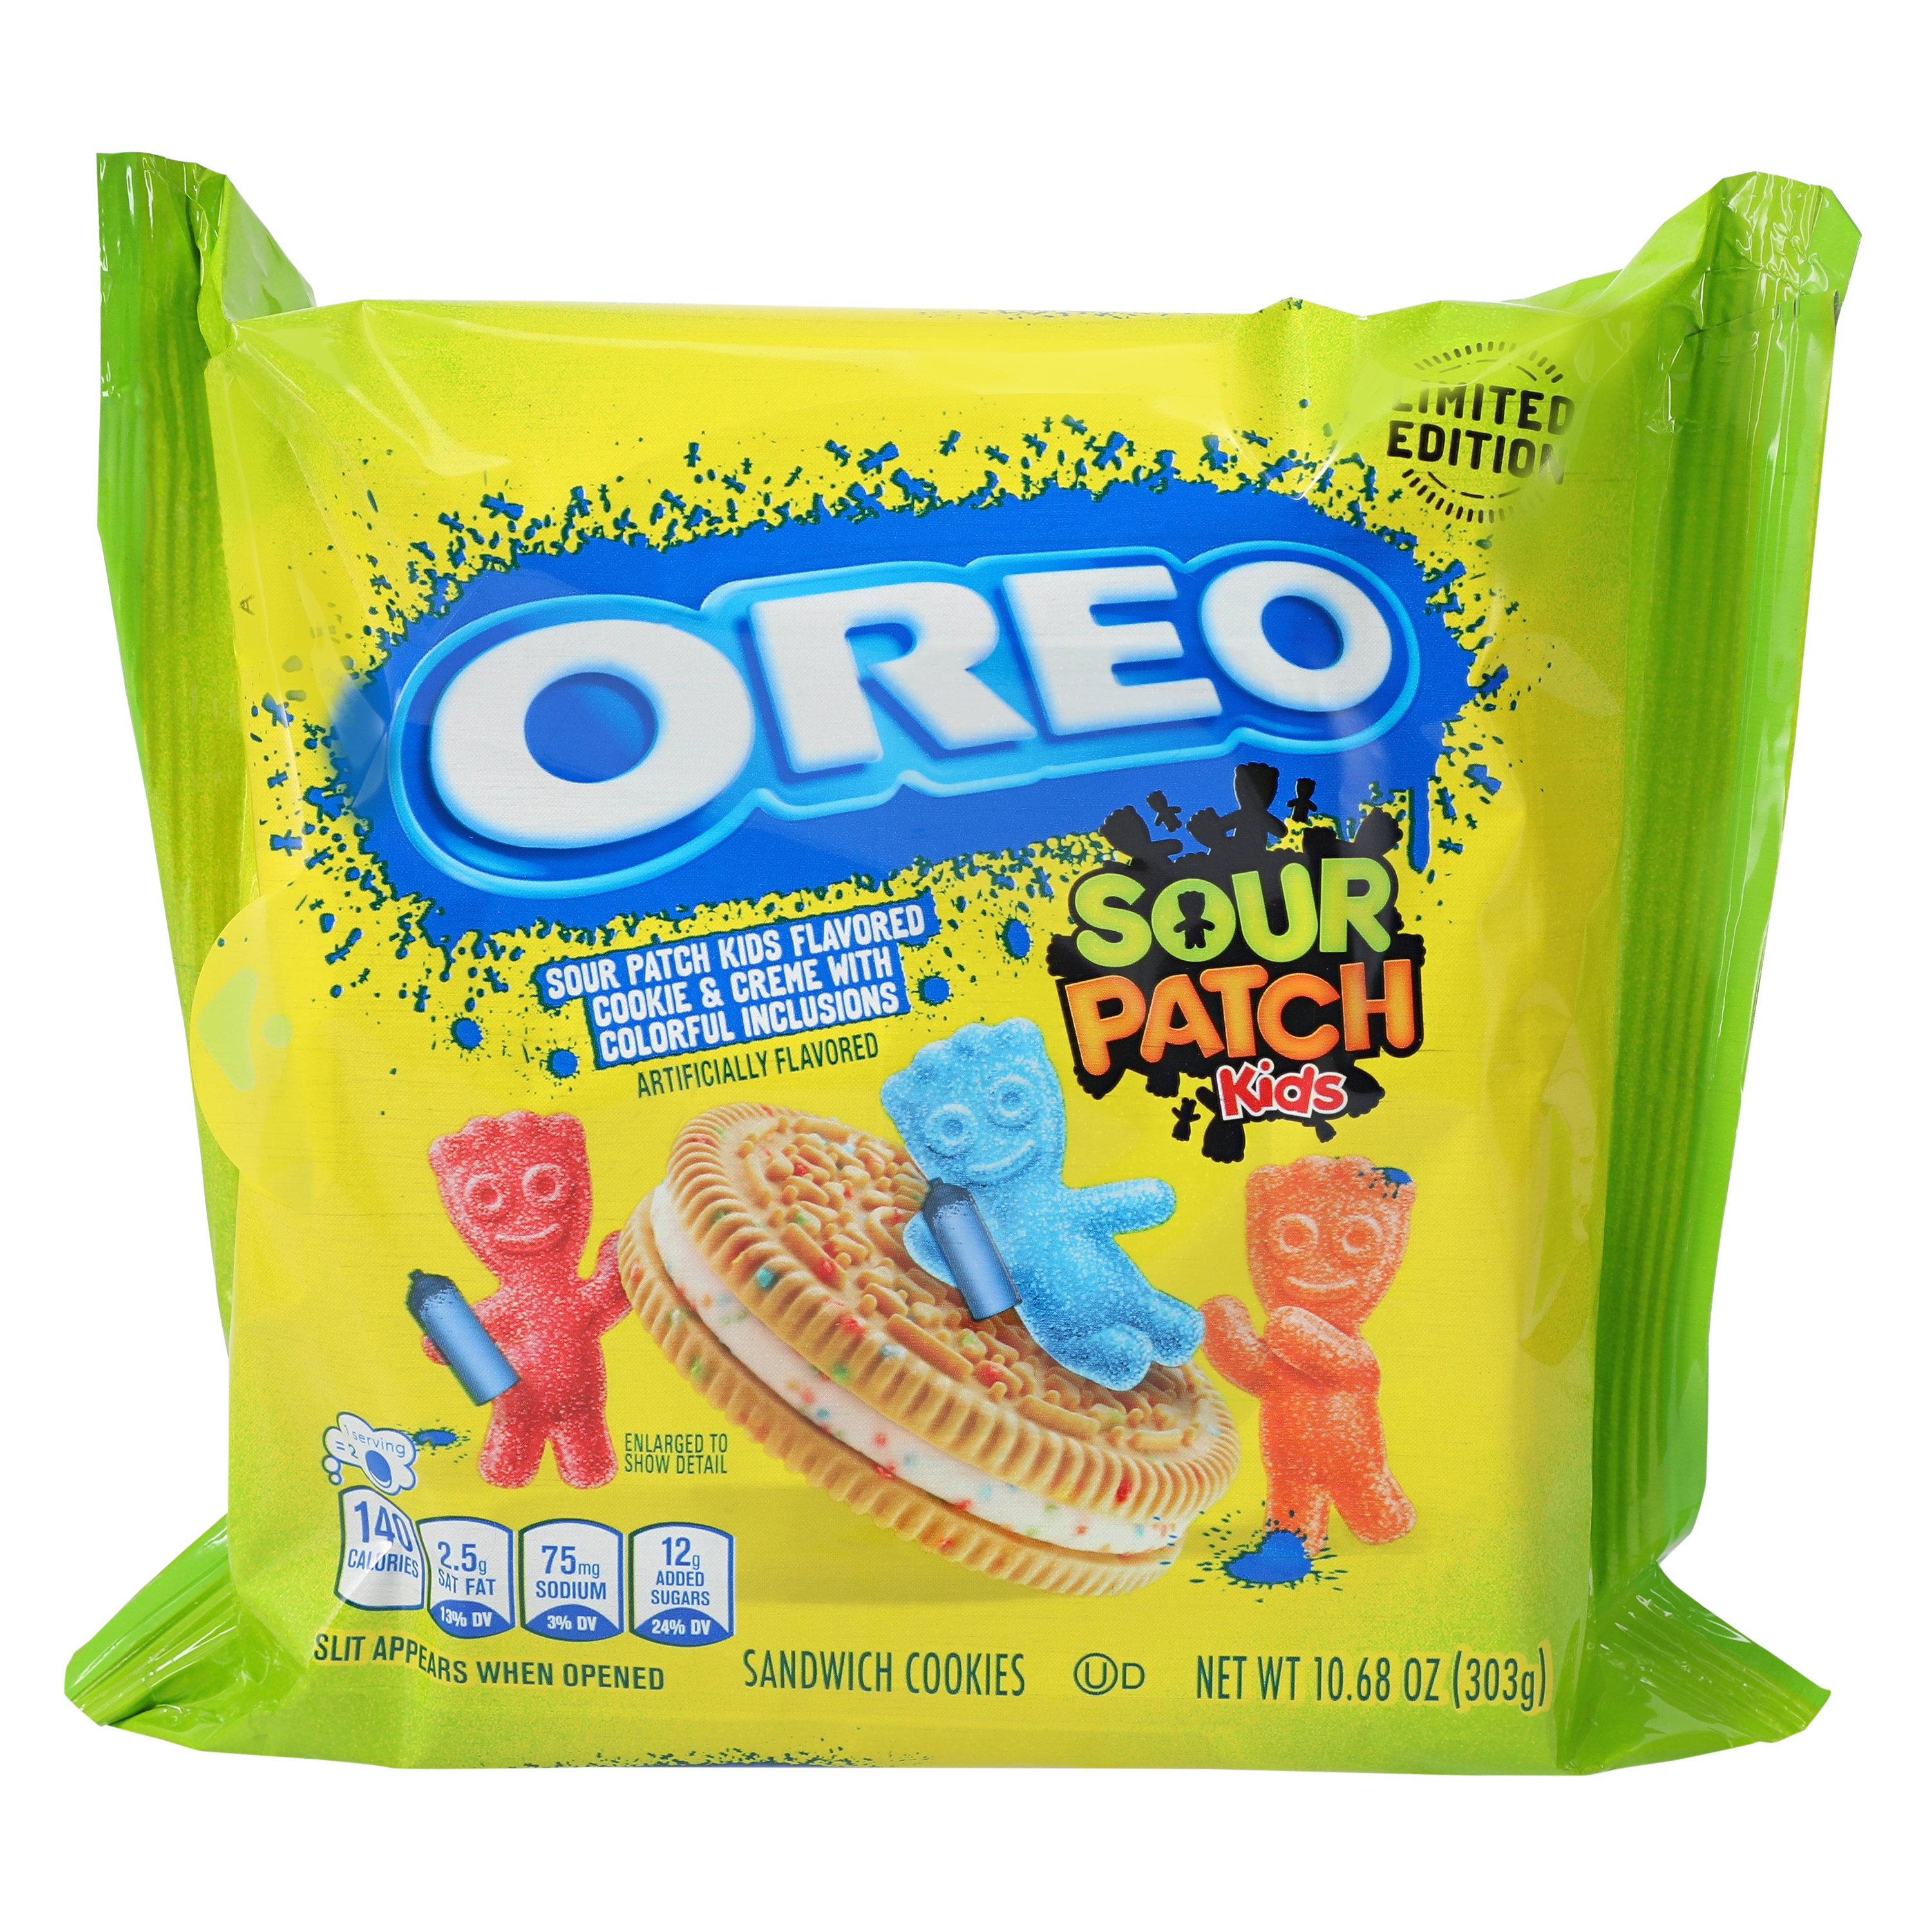 Oreo® x Sour Patch Kids® Limited Edition Sandwich Cookies 10.68oz